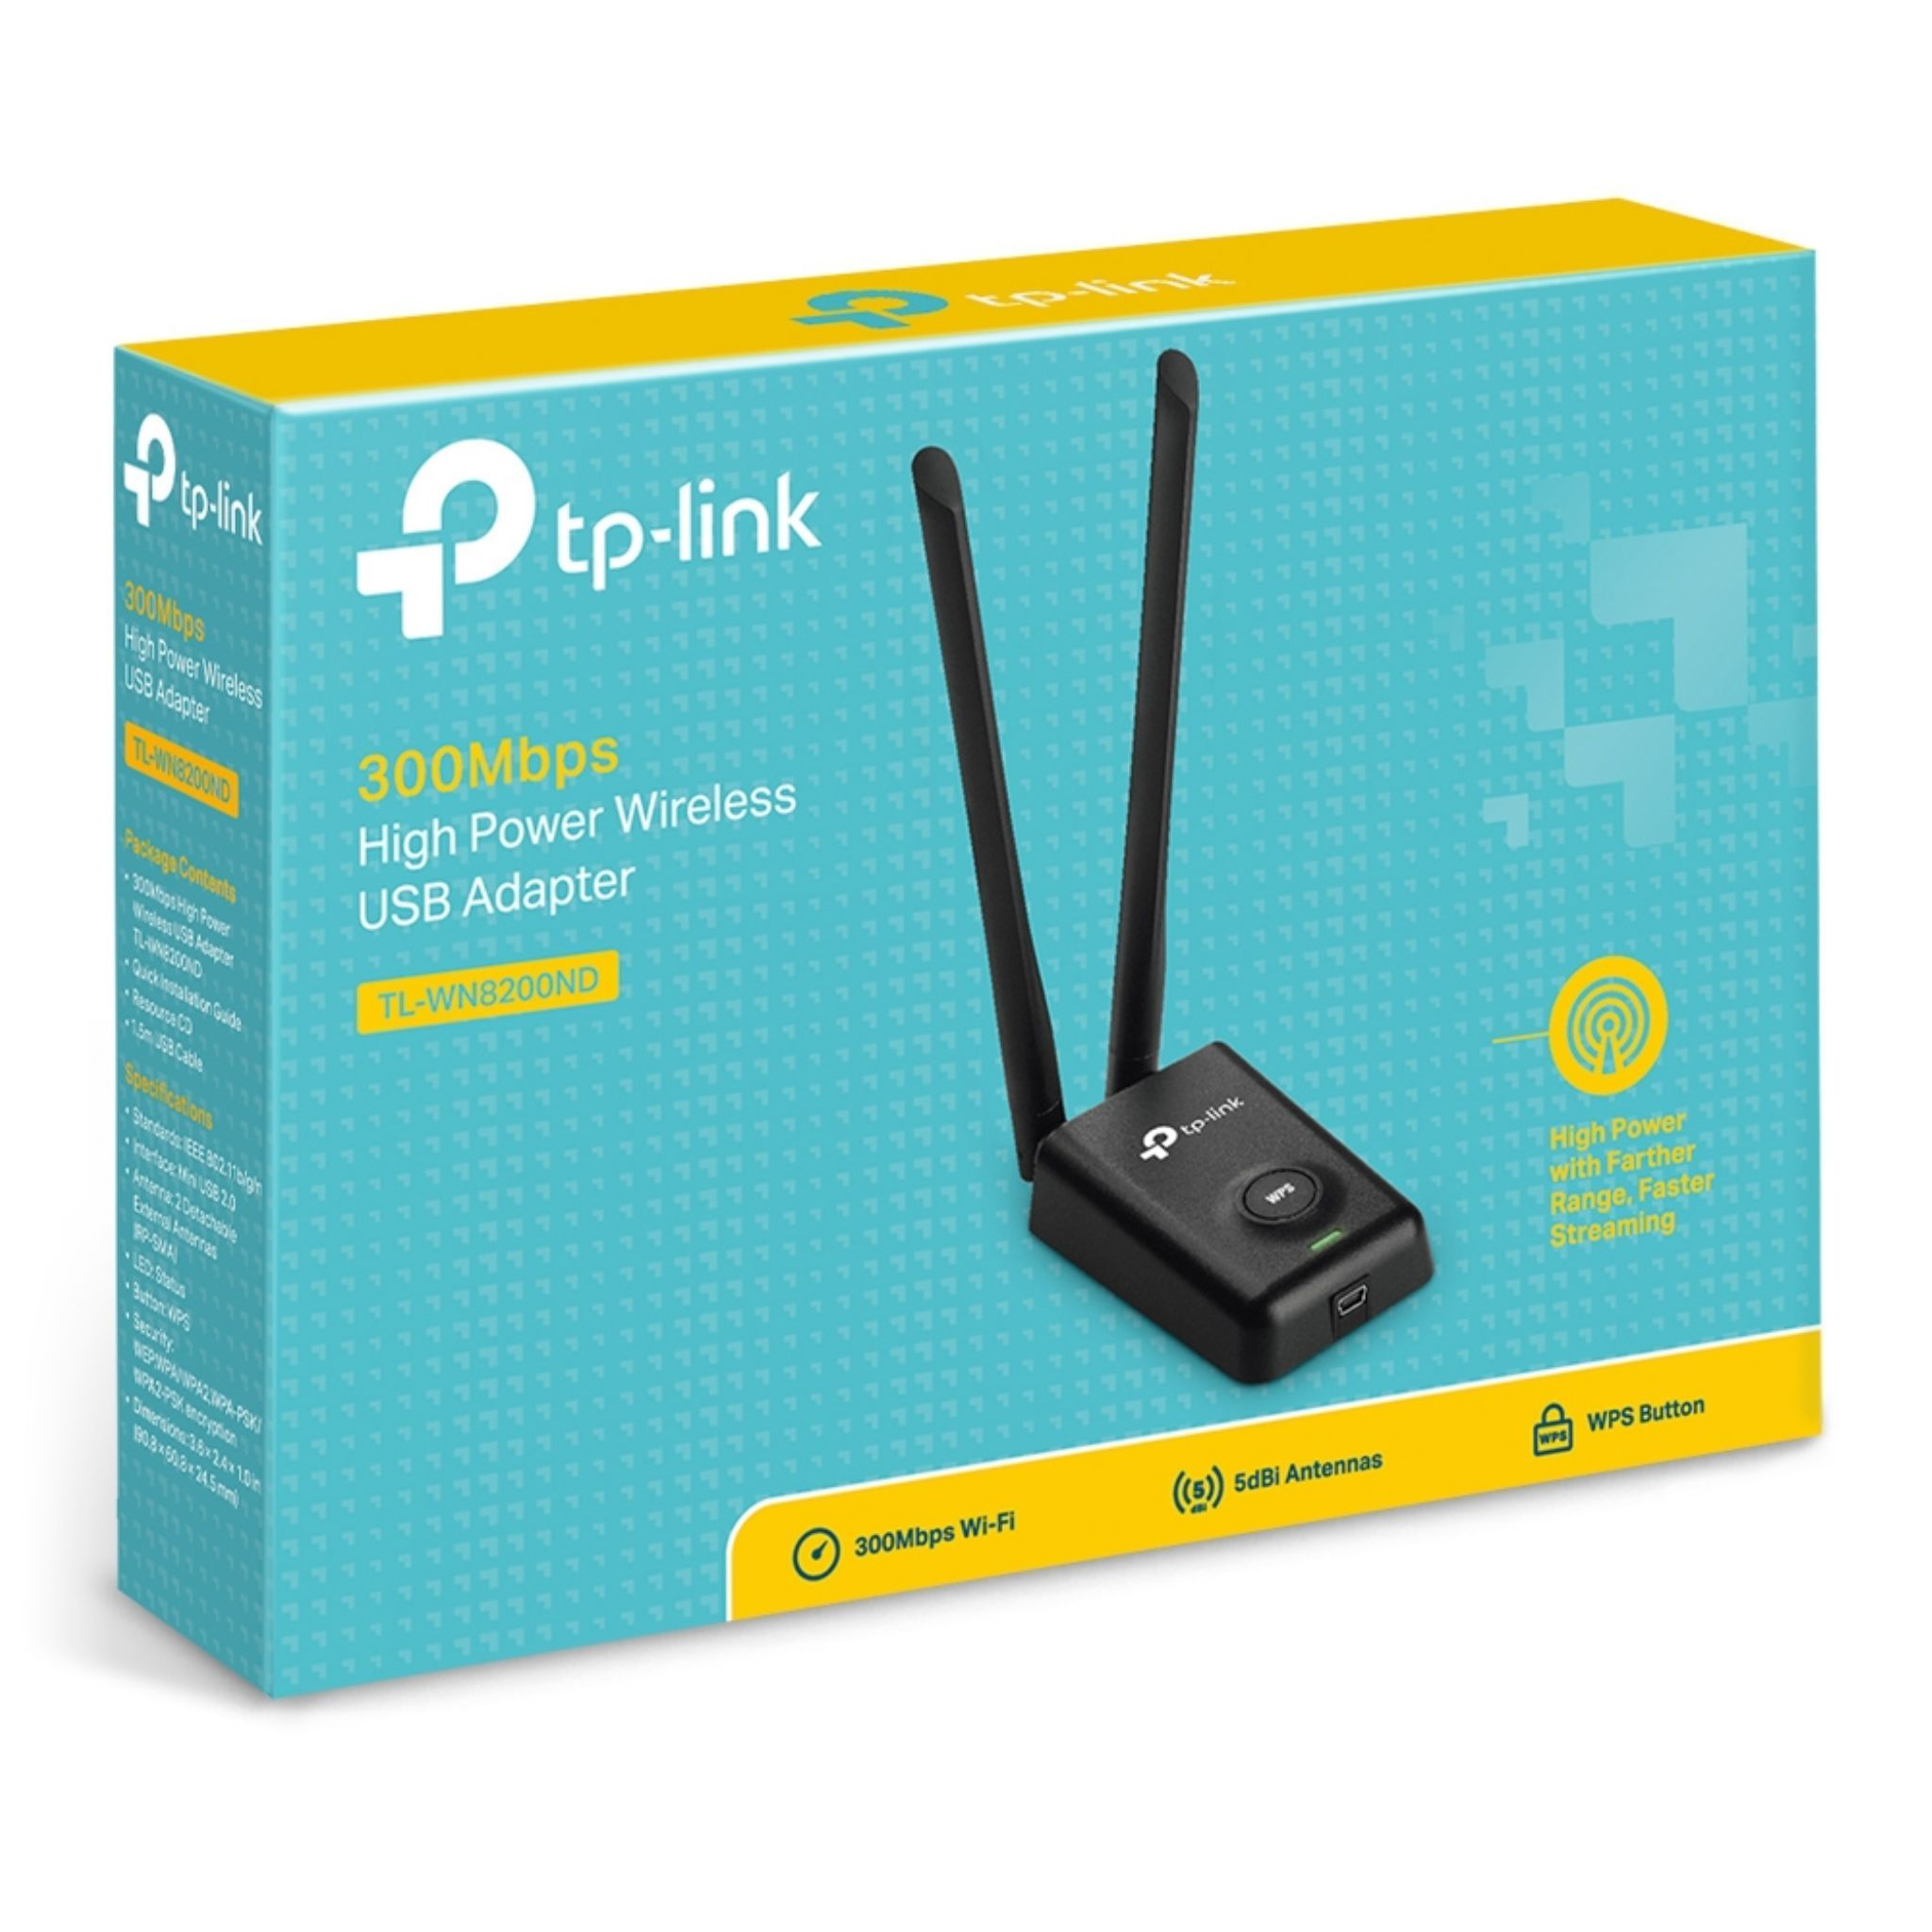 Netzadapter TP-LINK Mbit/s TL-WN8200ND 300